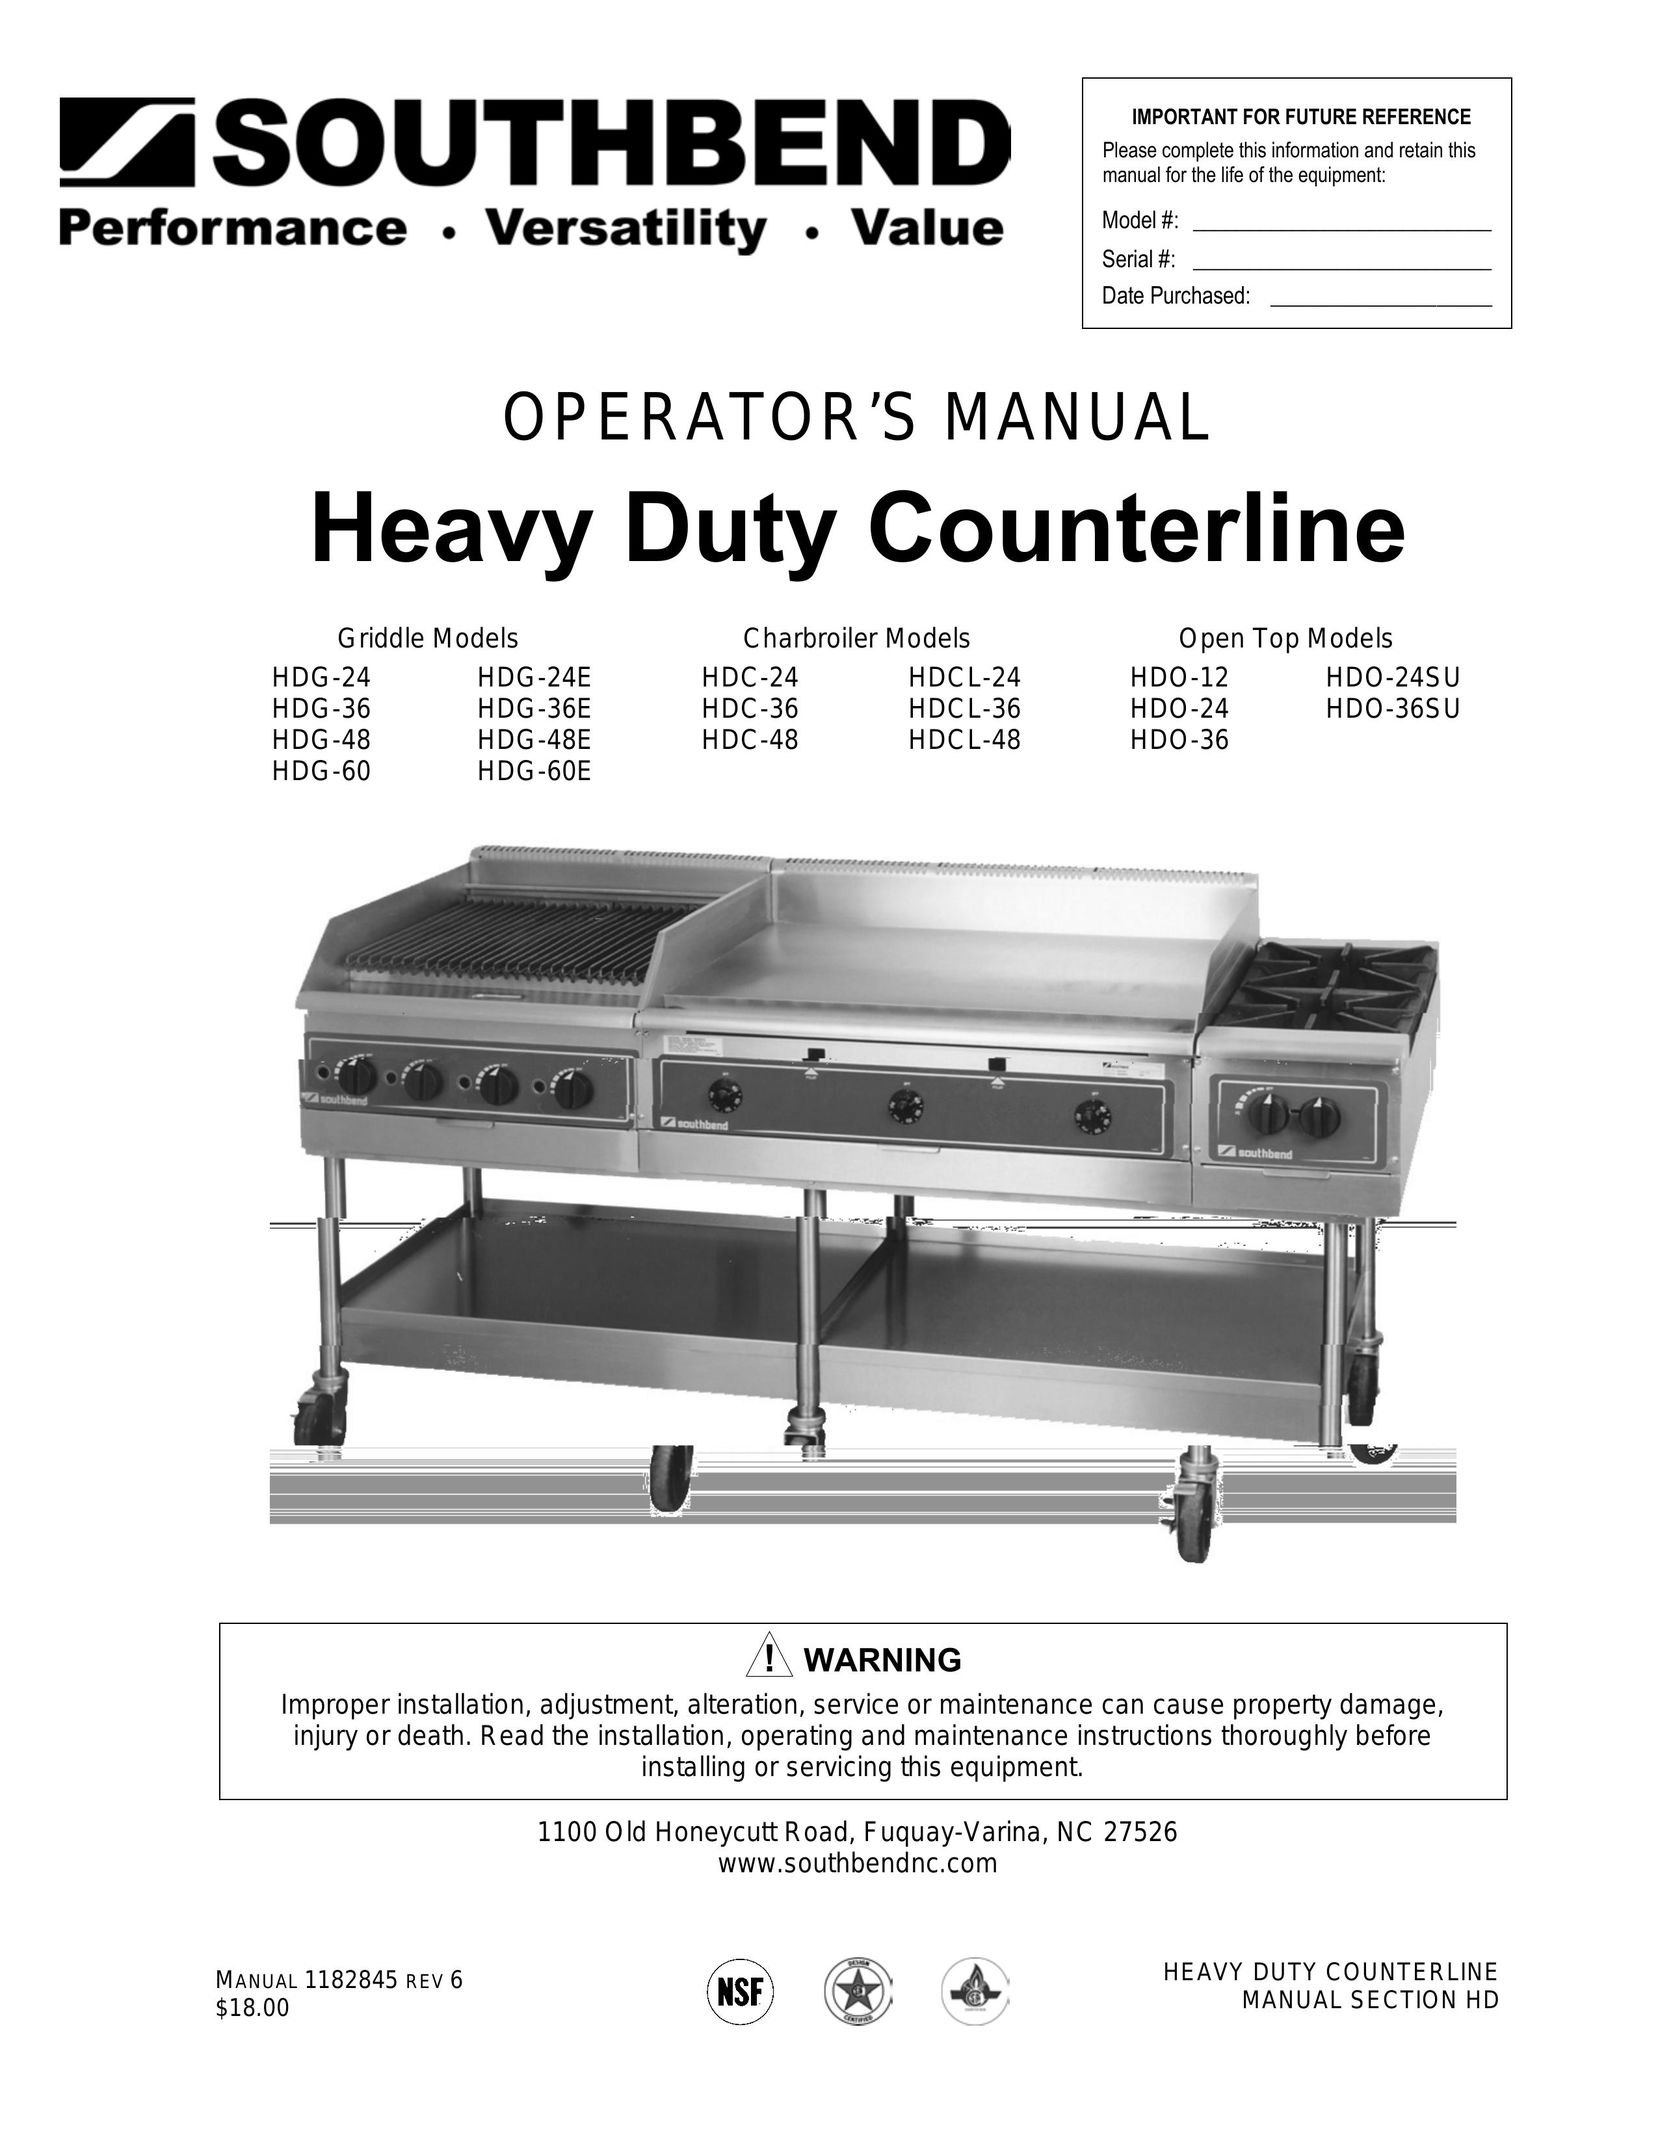 Southbend HDCL-48 Cooktop User Manual